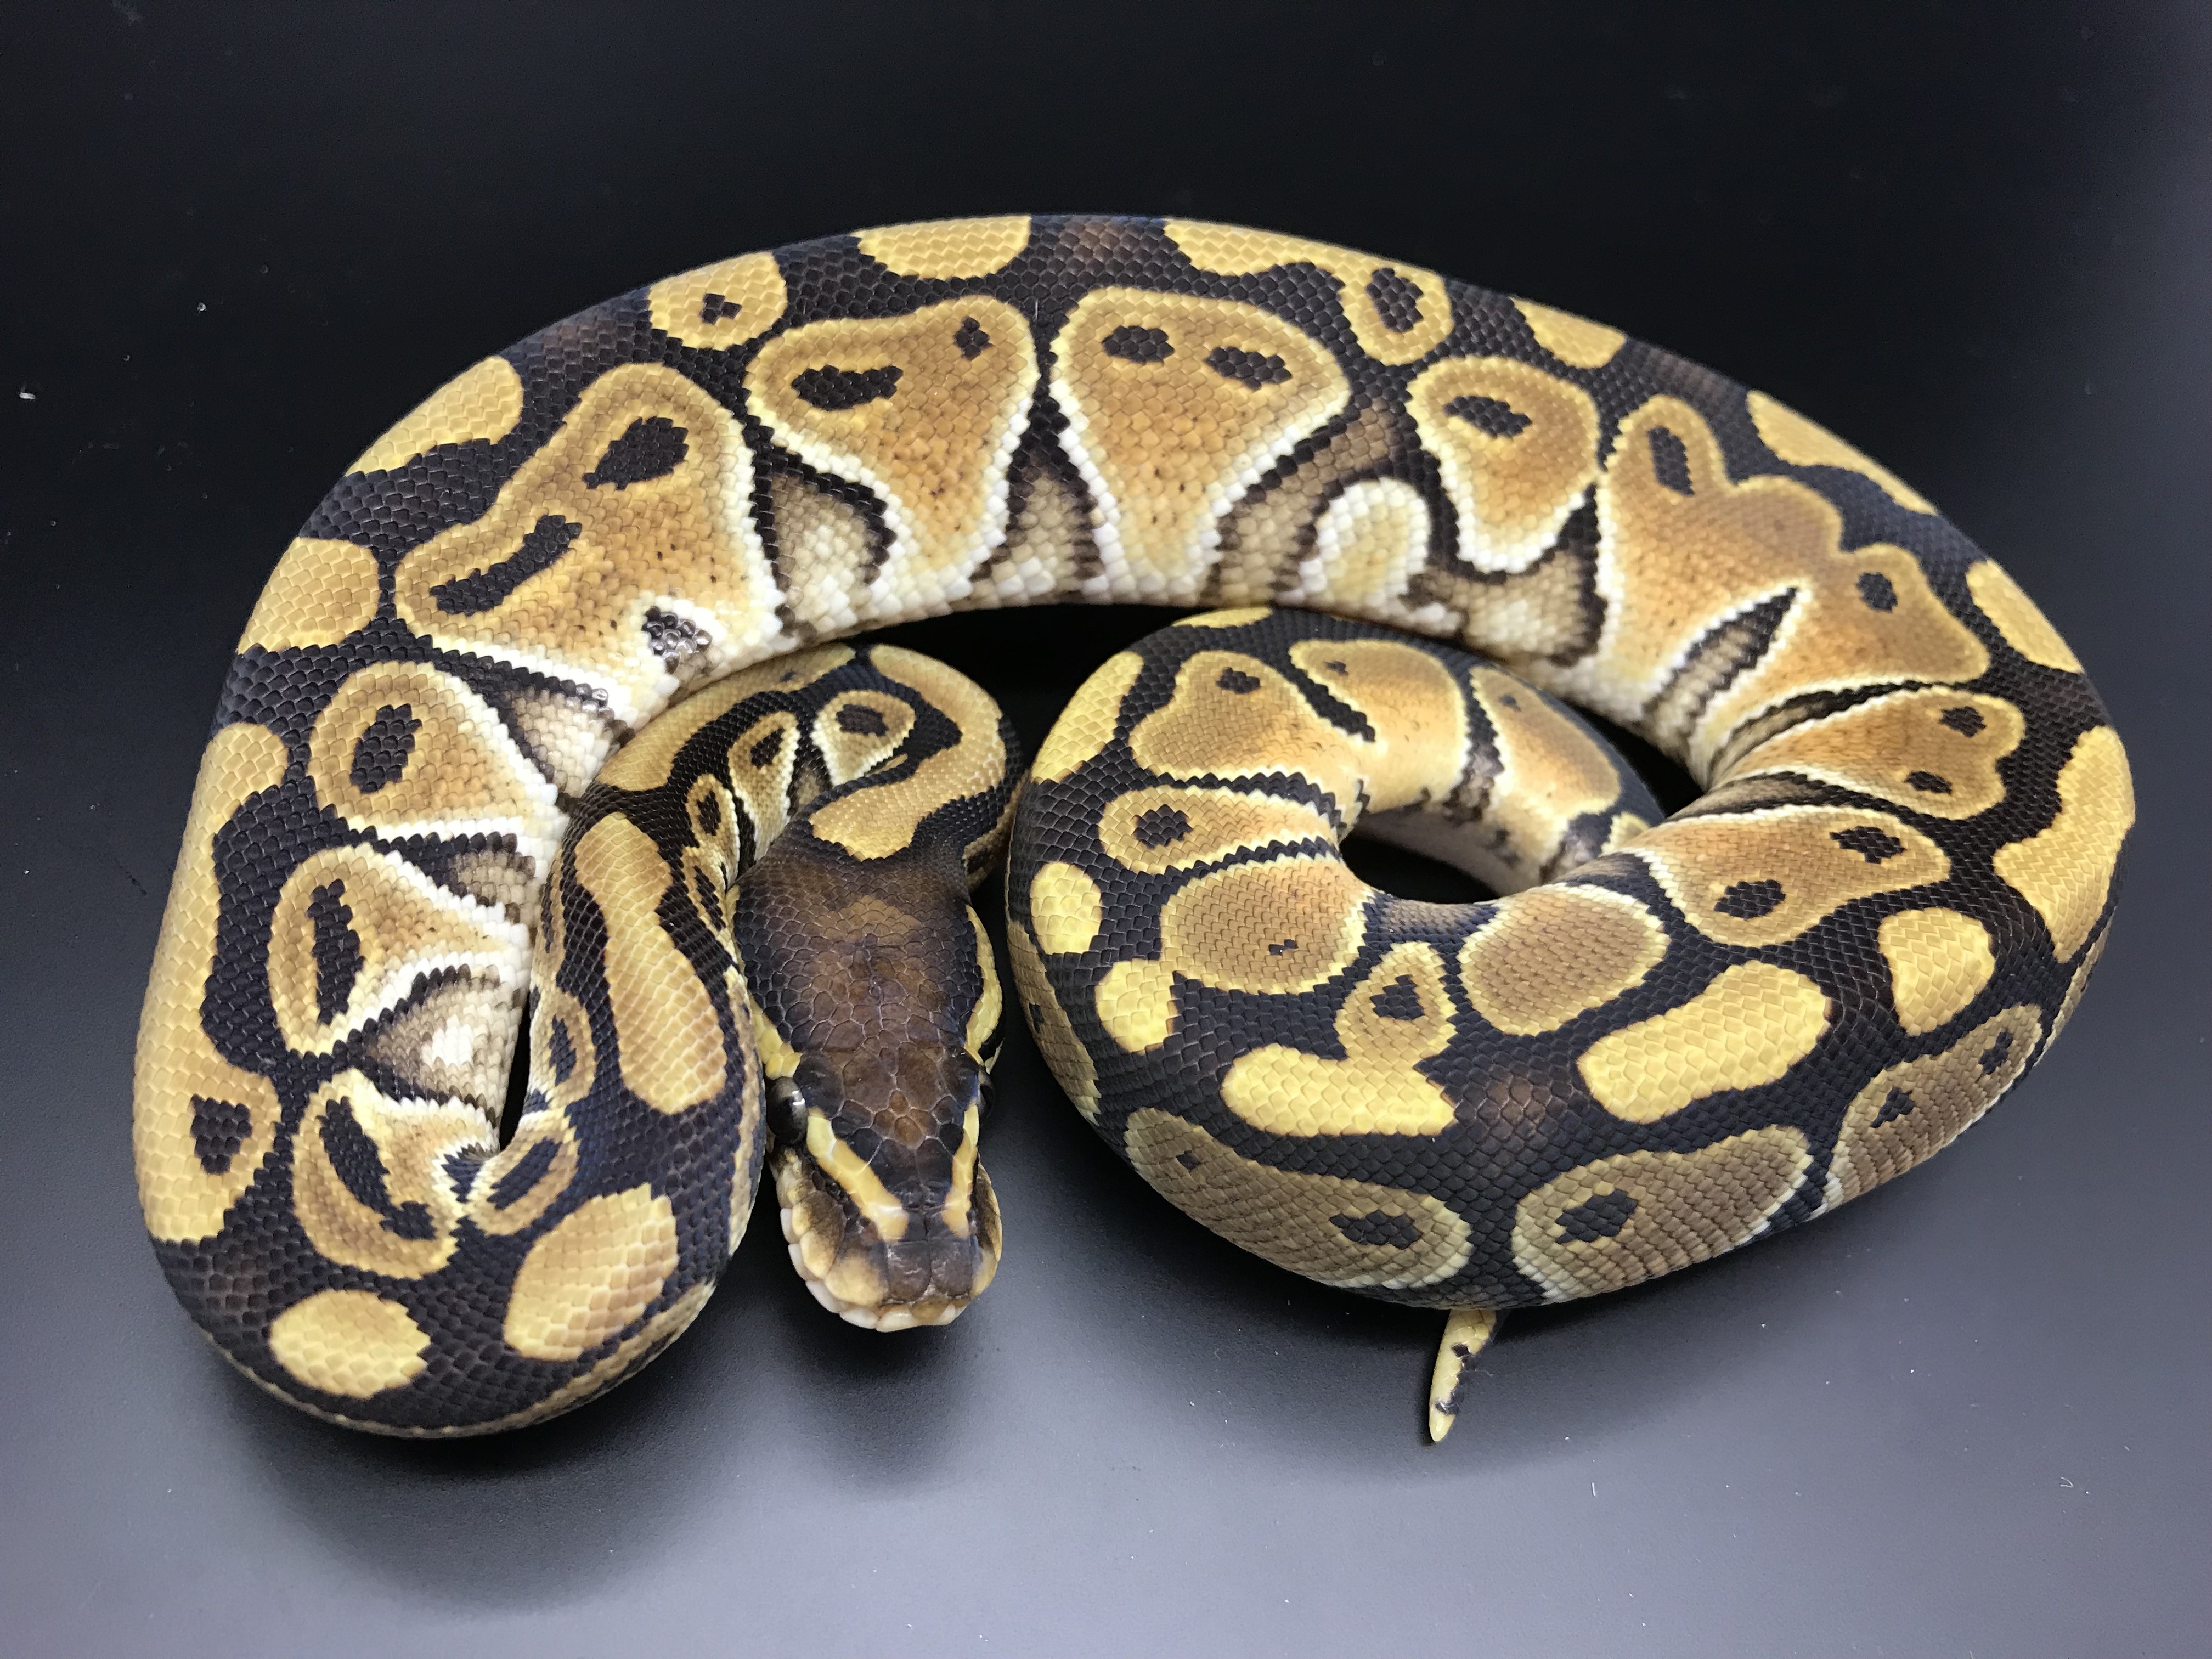 Mocha Ball Python by Wreck room snakes